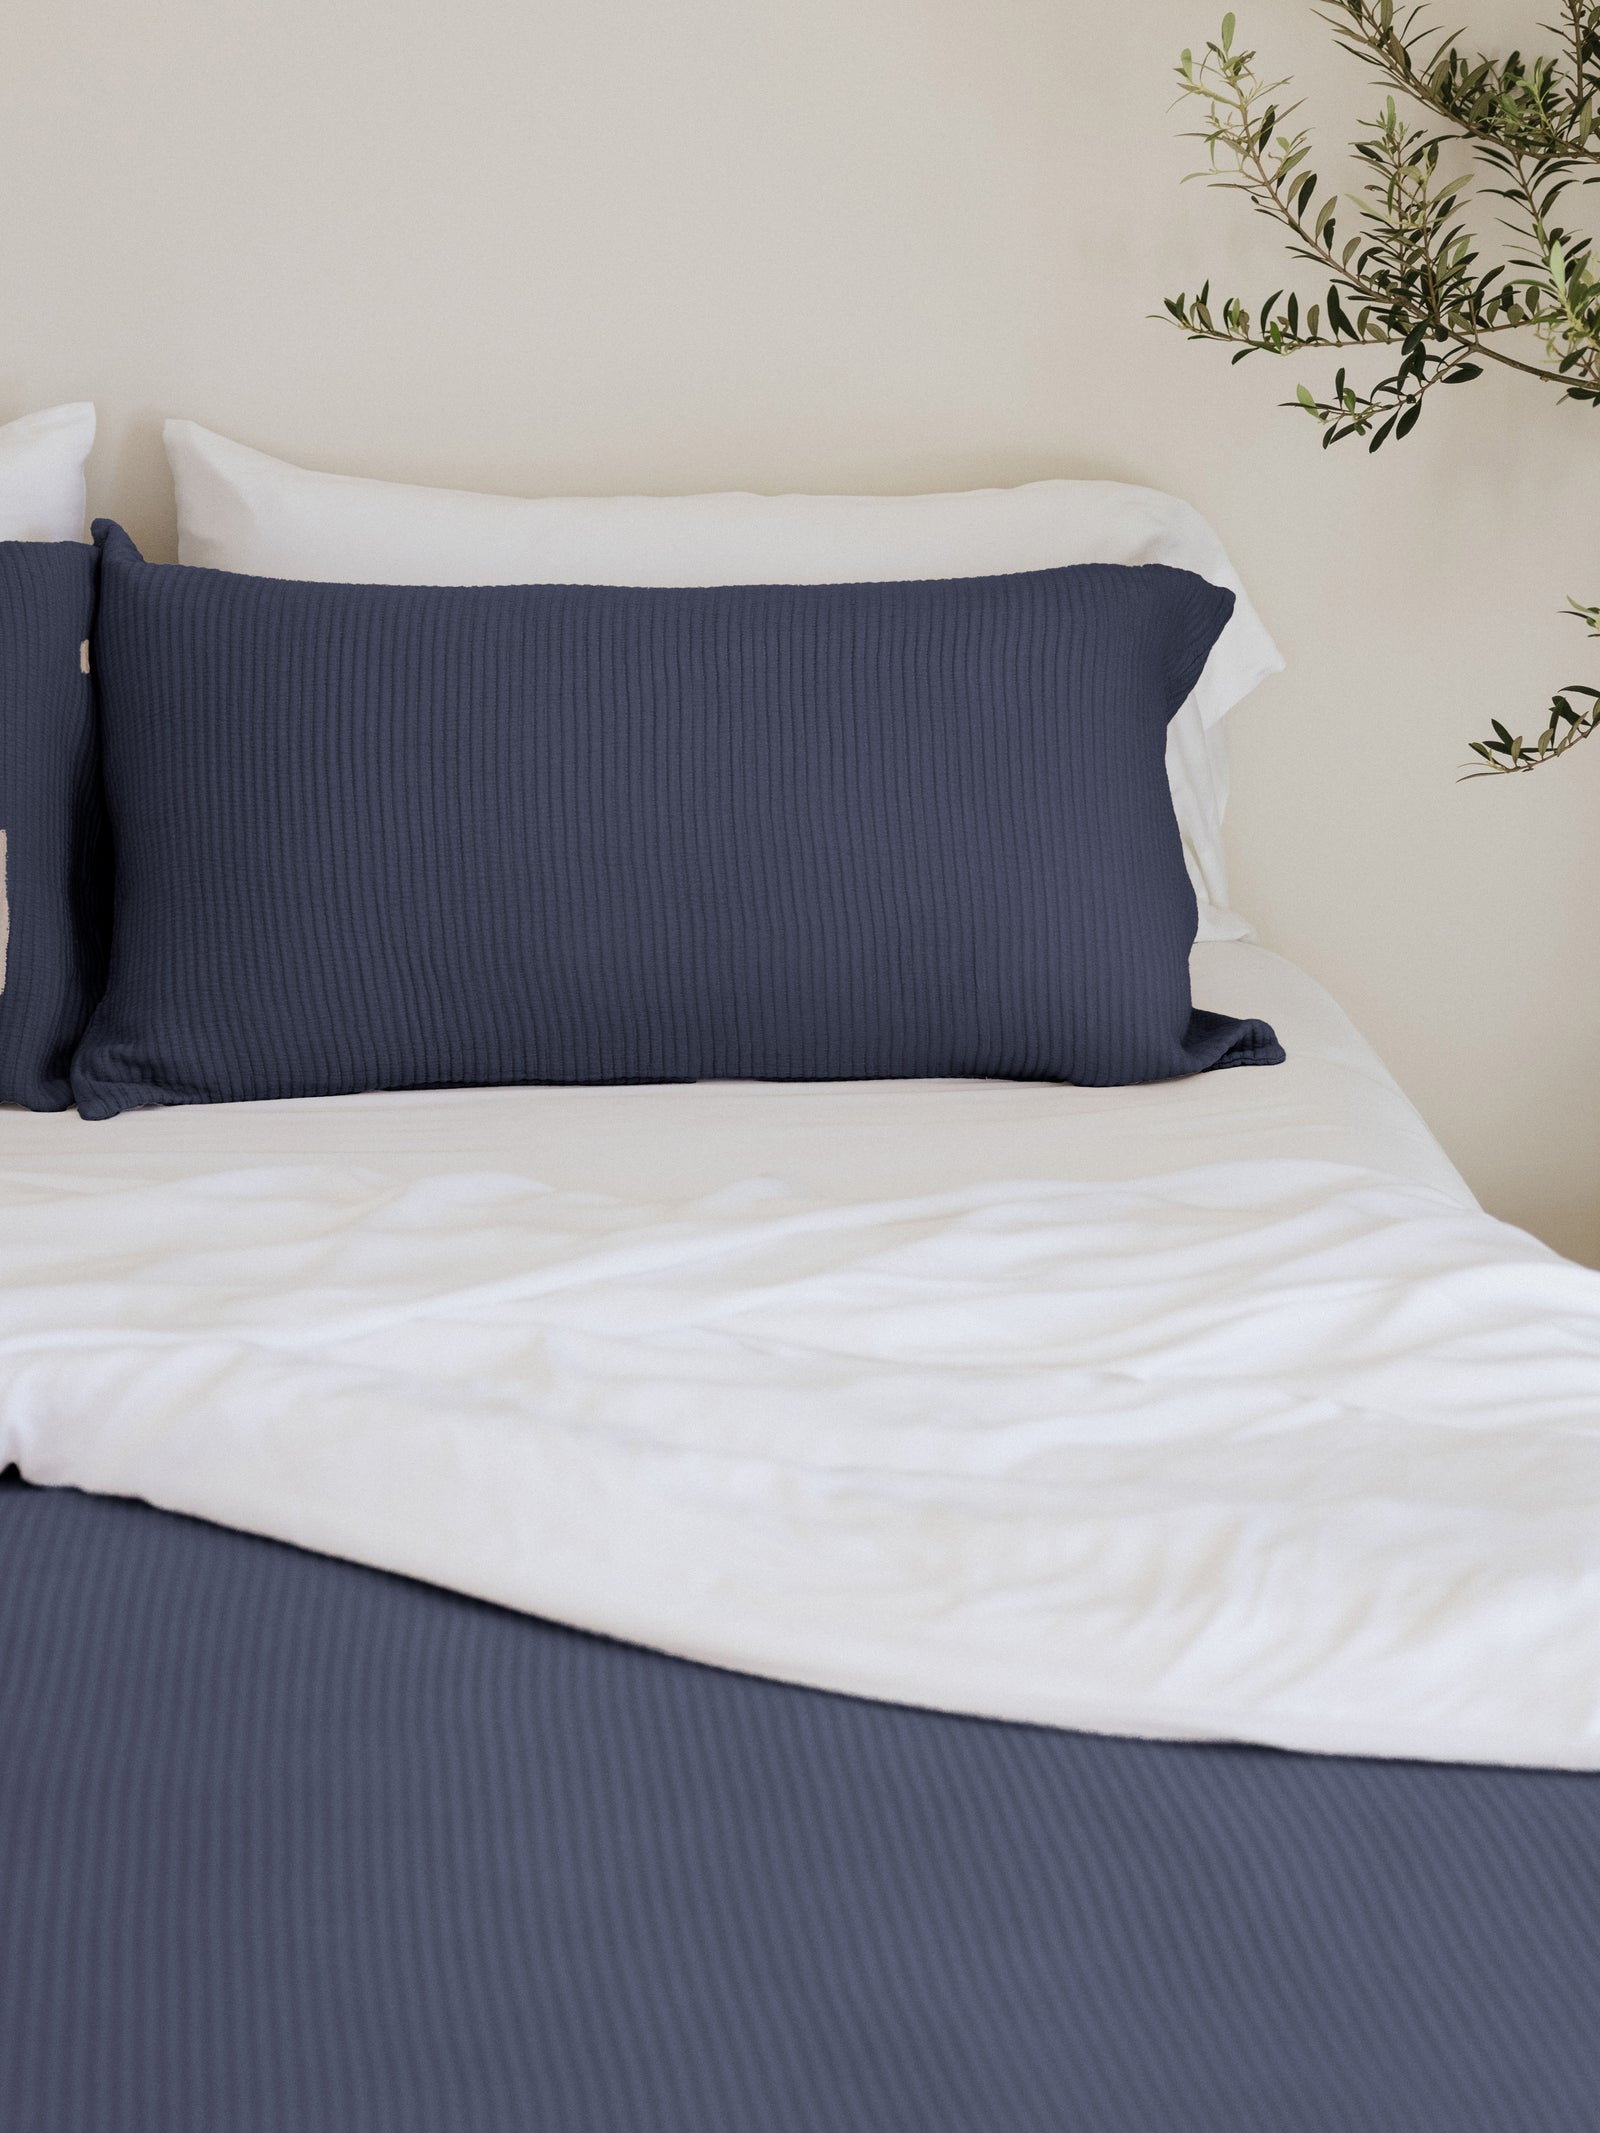 Navy coverlet shams and quilt on white bed 